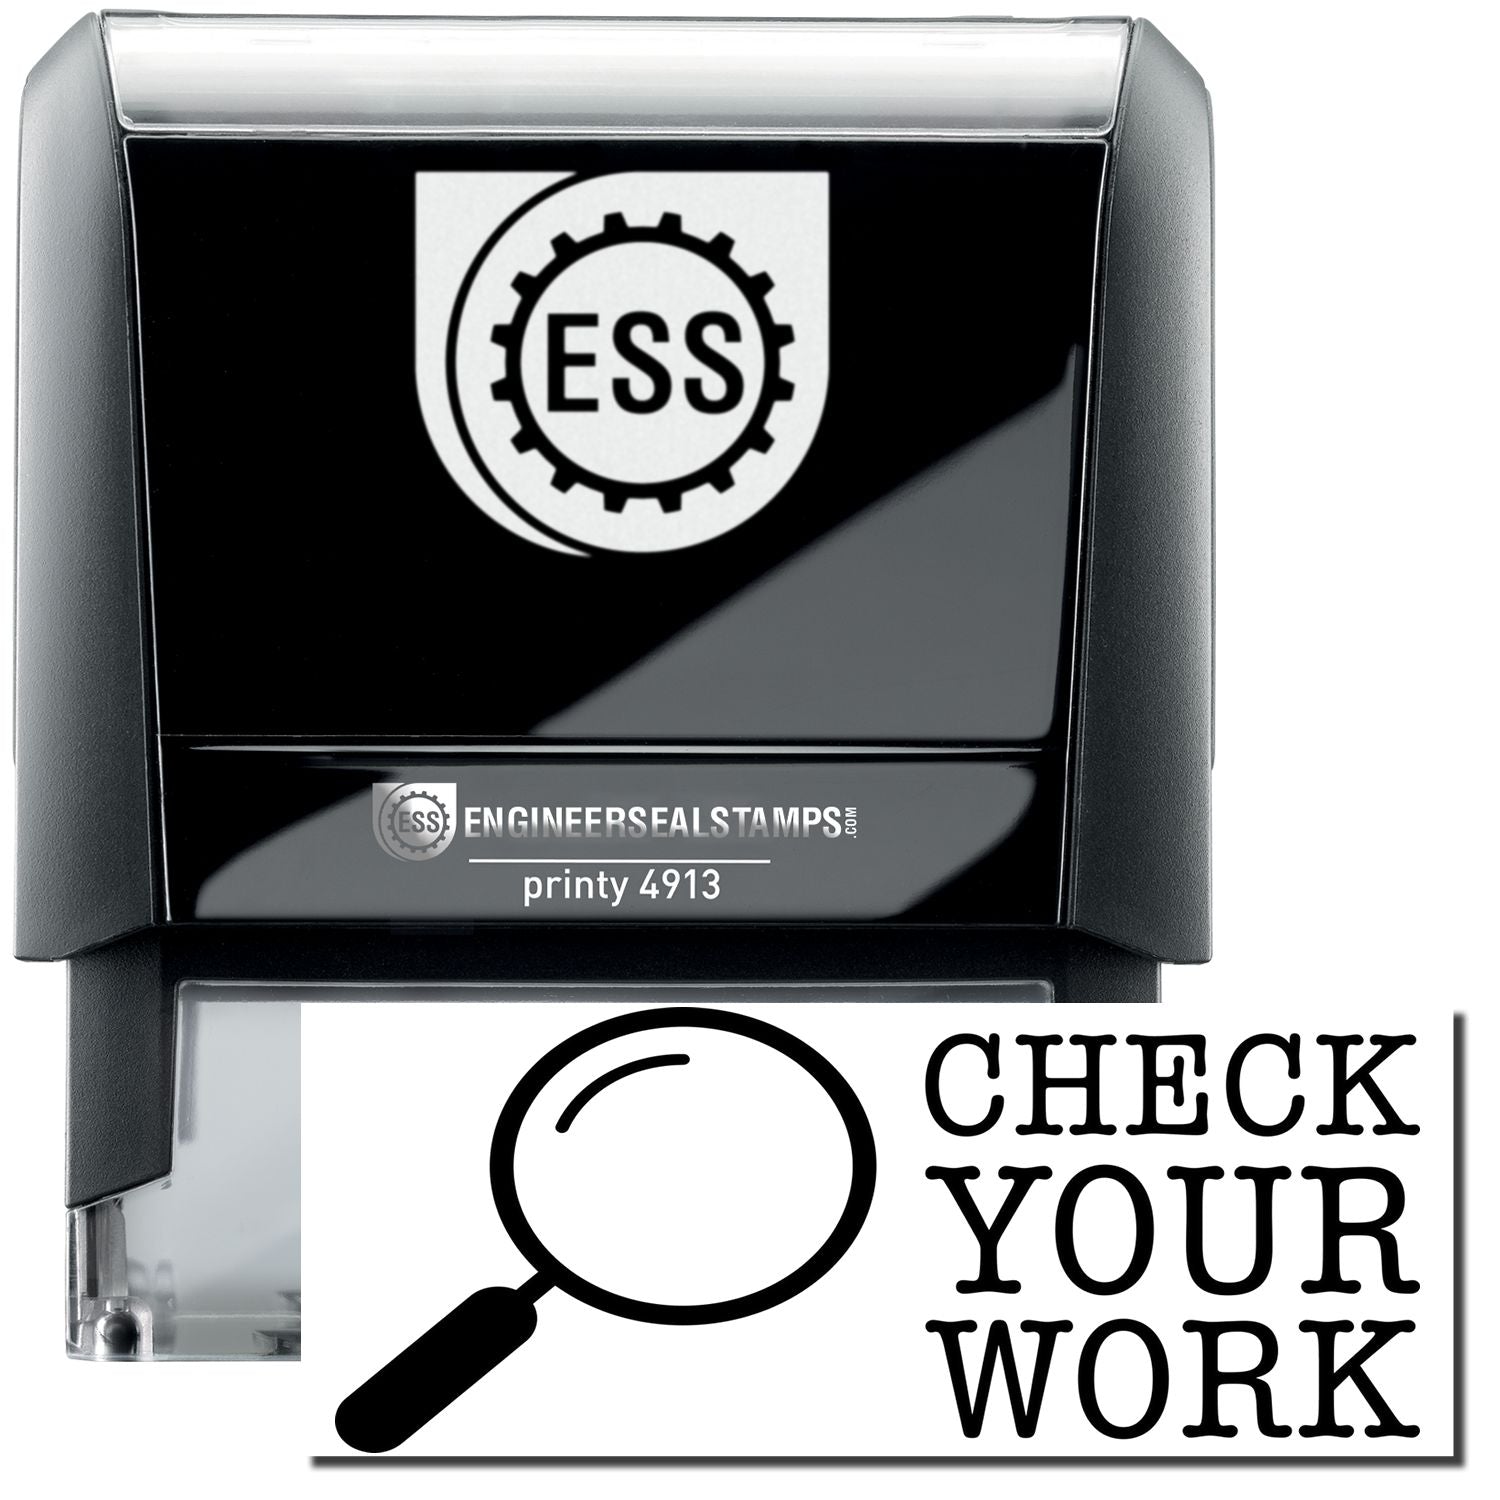 A self-inking stamp with a stamped image showing how the text "CHECK YOUR WORK" in a large unique font (each word in vertical order) with a detective glass image on the left side is displayed by it after stamping.